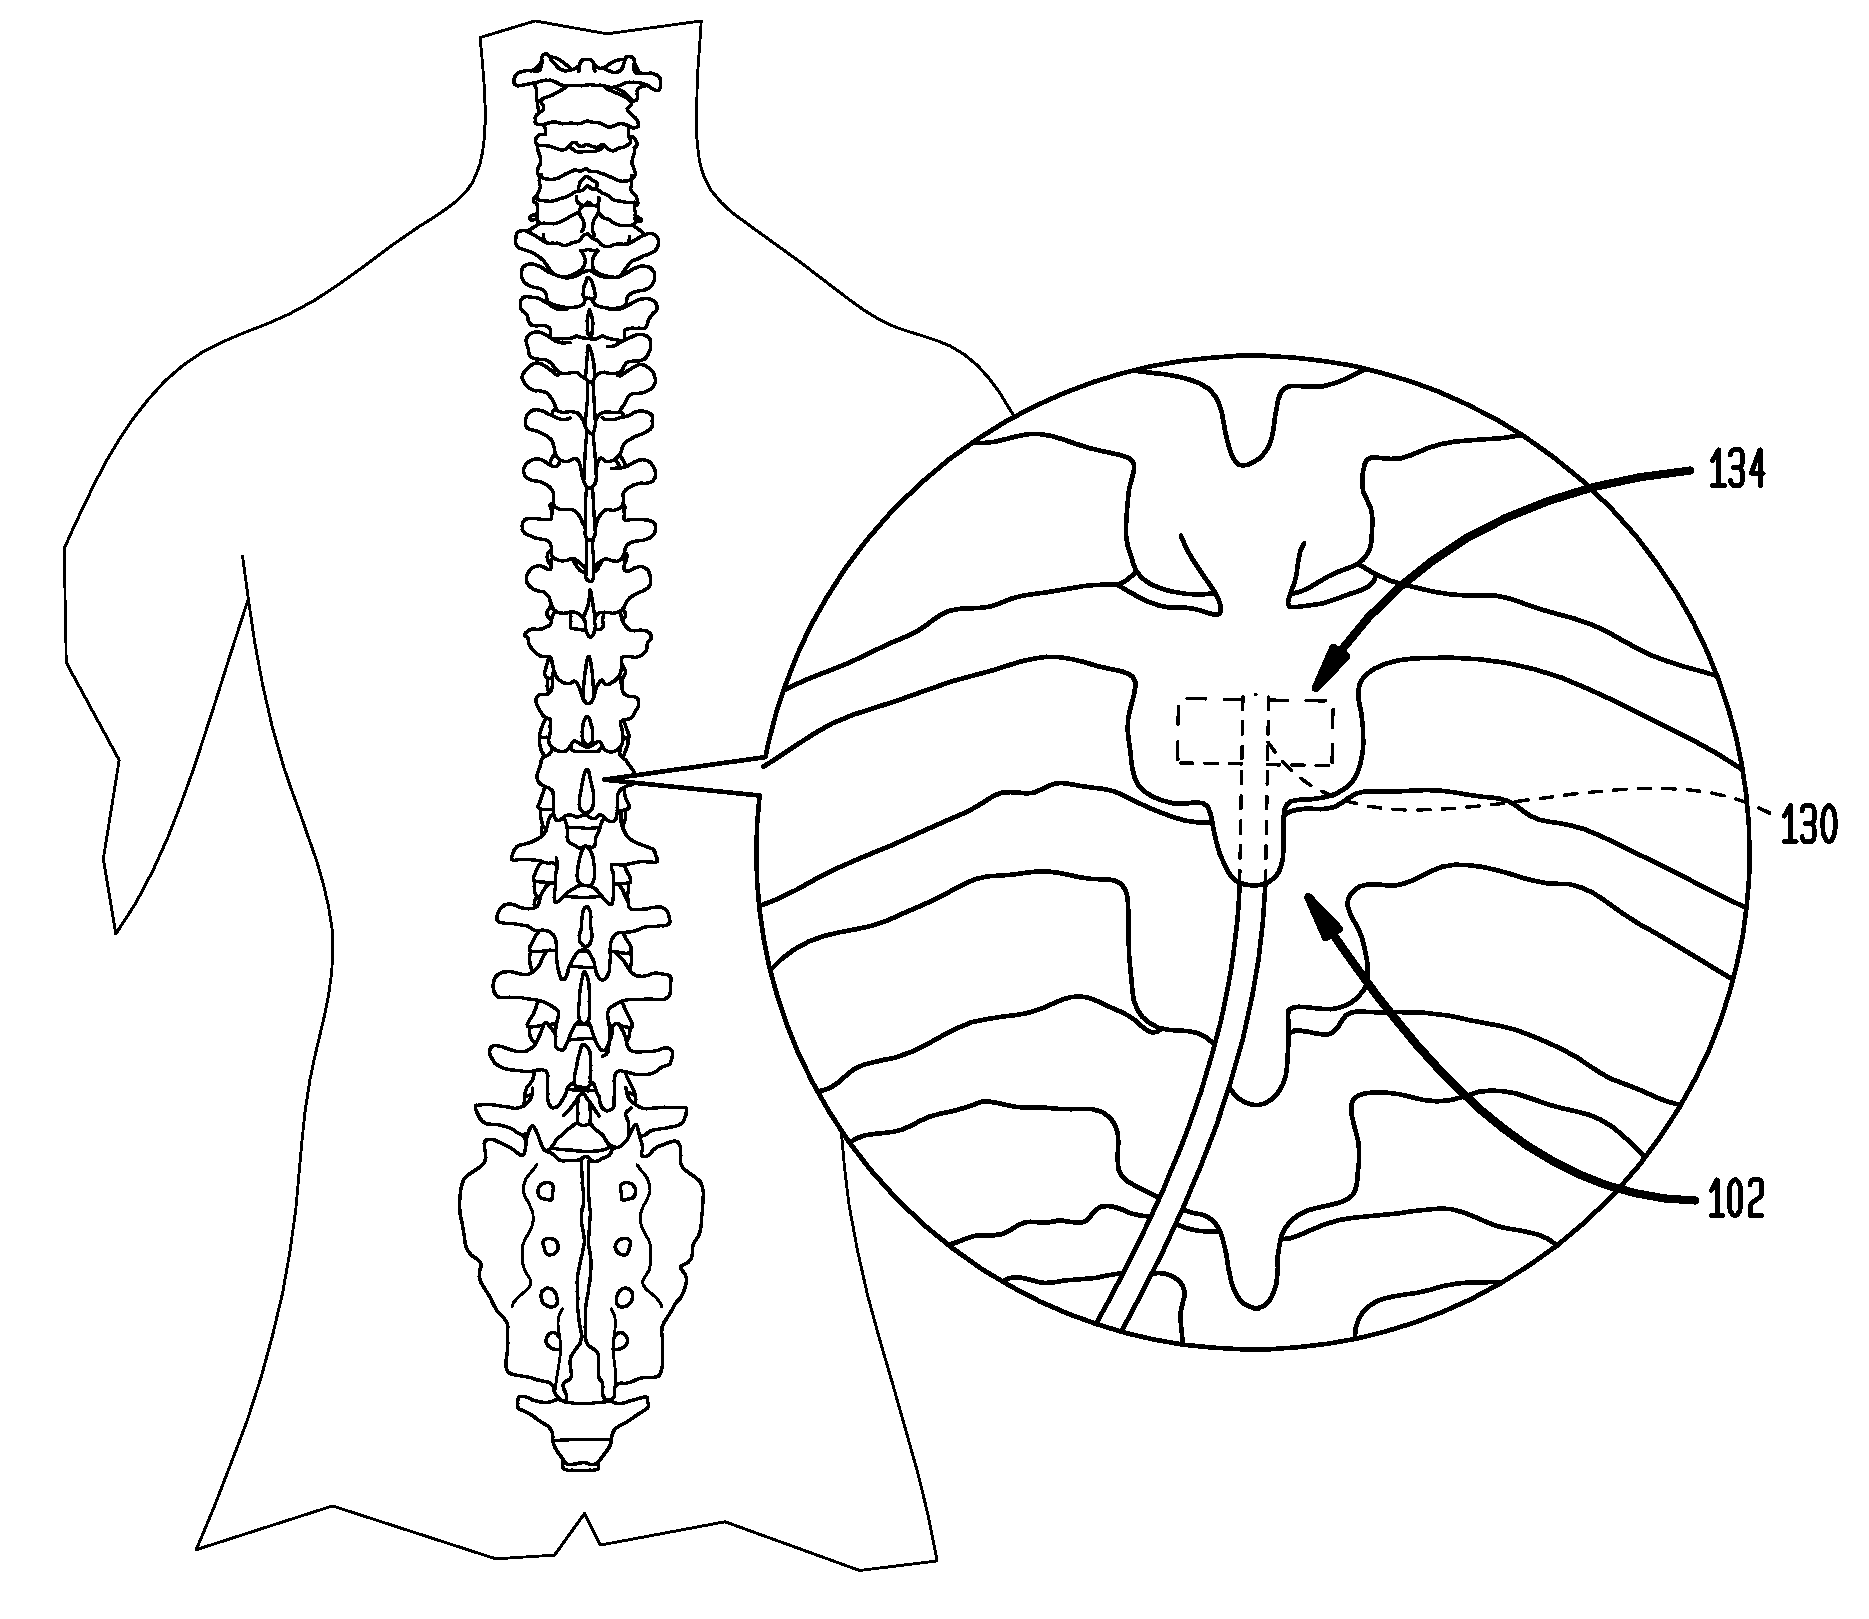 Methods and apparatus for spinal cord stimulation using expandable electrode